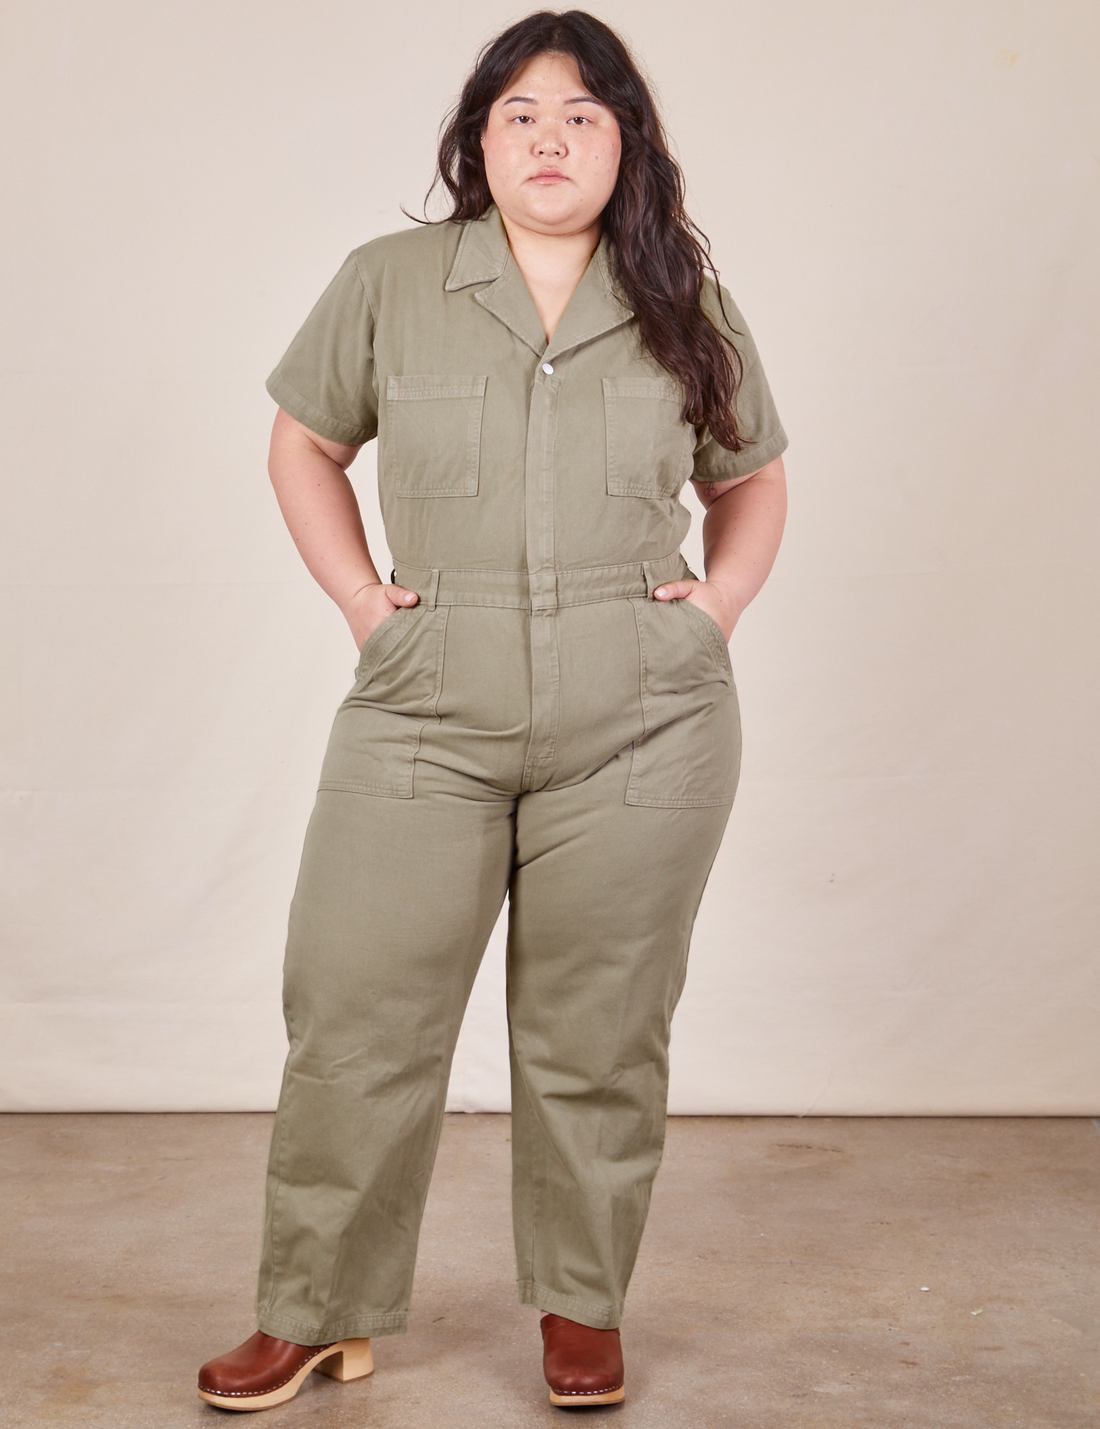 Ashley is 5'7" and wearing 1XL Short Sleeve Jumpsuit in Khaki Grey